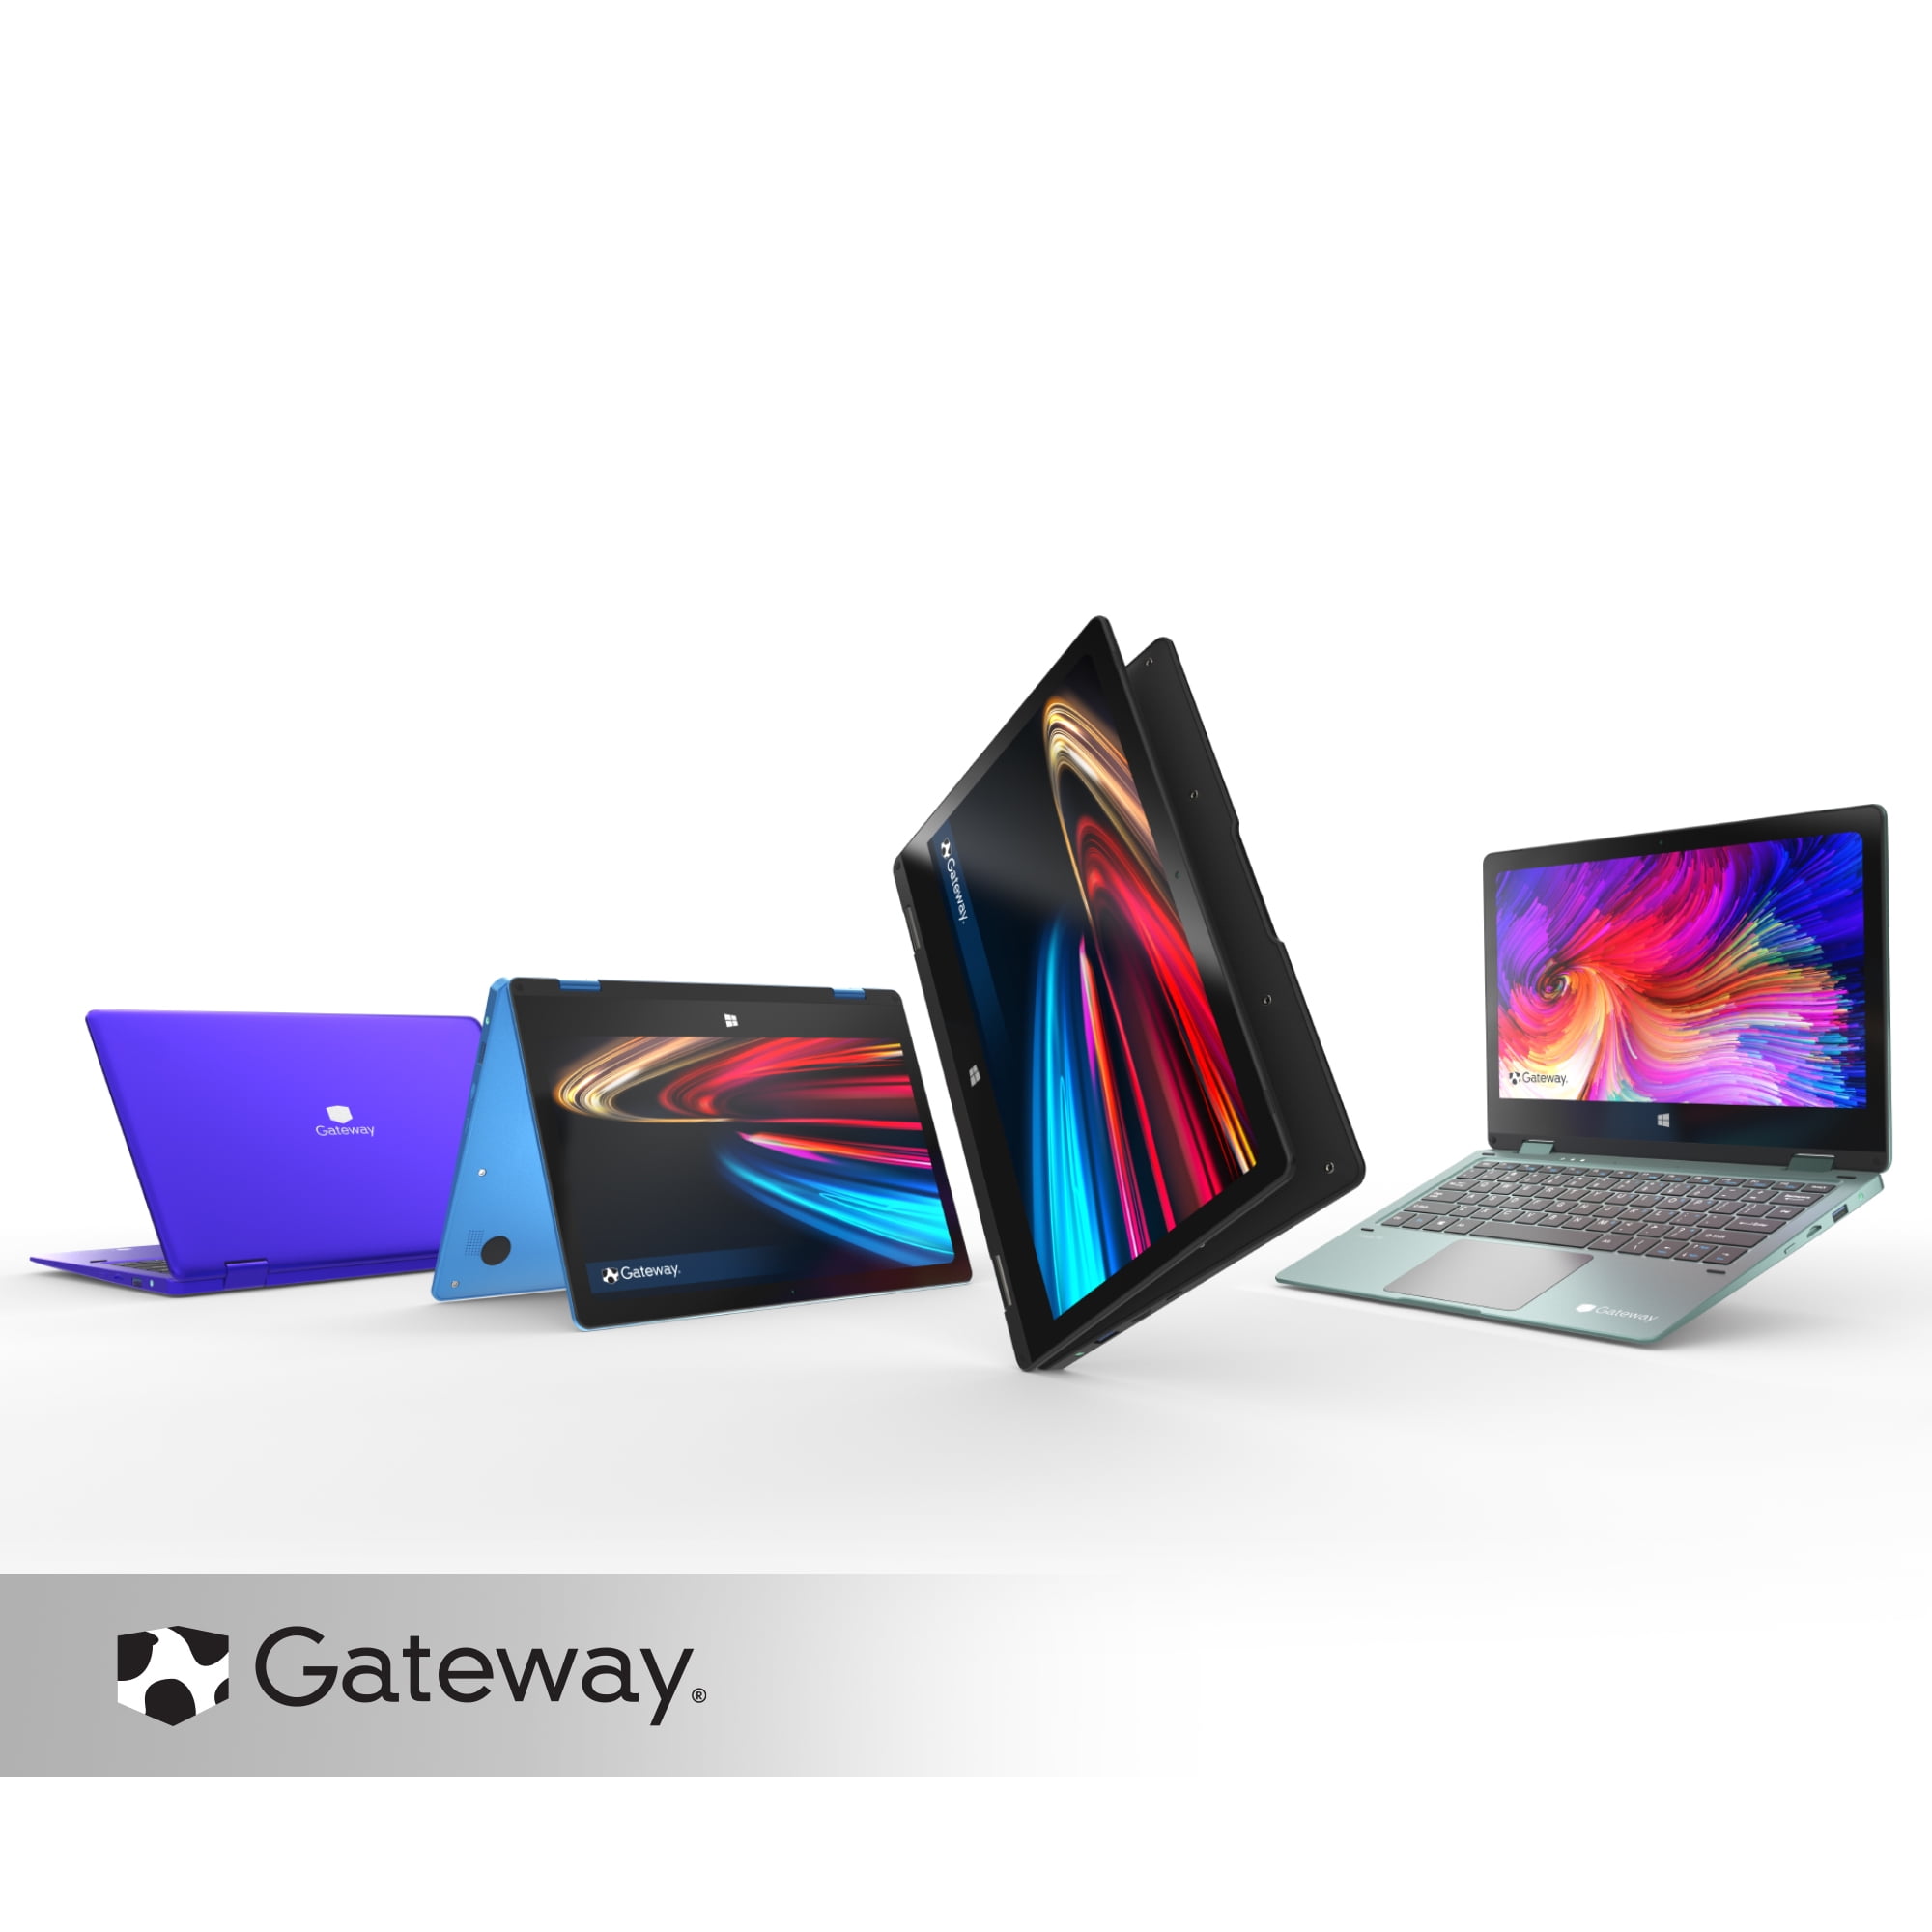 Gateway 11.6" FHD 2-in-1 Convertible Notebook, Intel Celeron, 4GB RAM, 64GB Storage, Tuned by THX™ Audio, Webcam, Windows 10 S, Microsoft 365 Personal 1-Year Included, Google Classroom Compatible